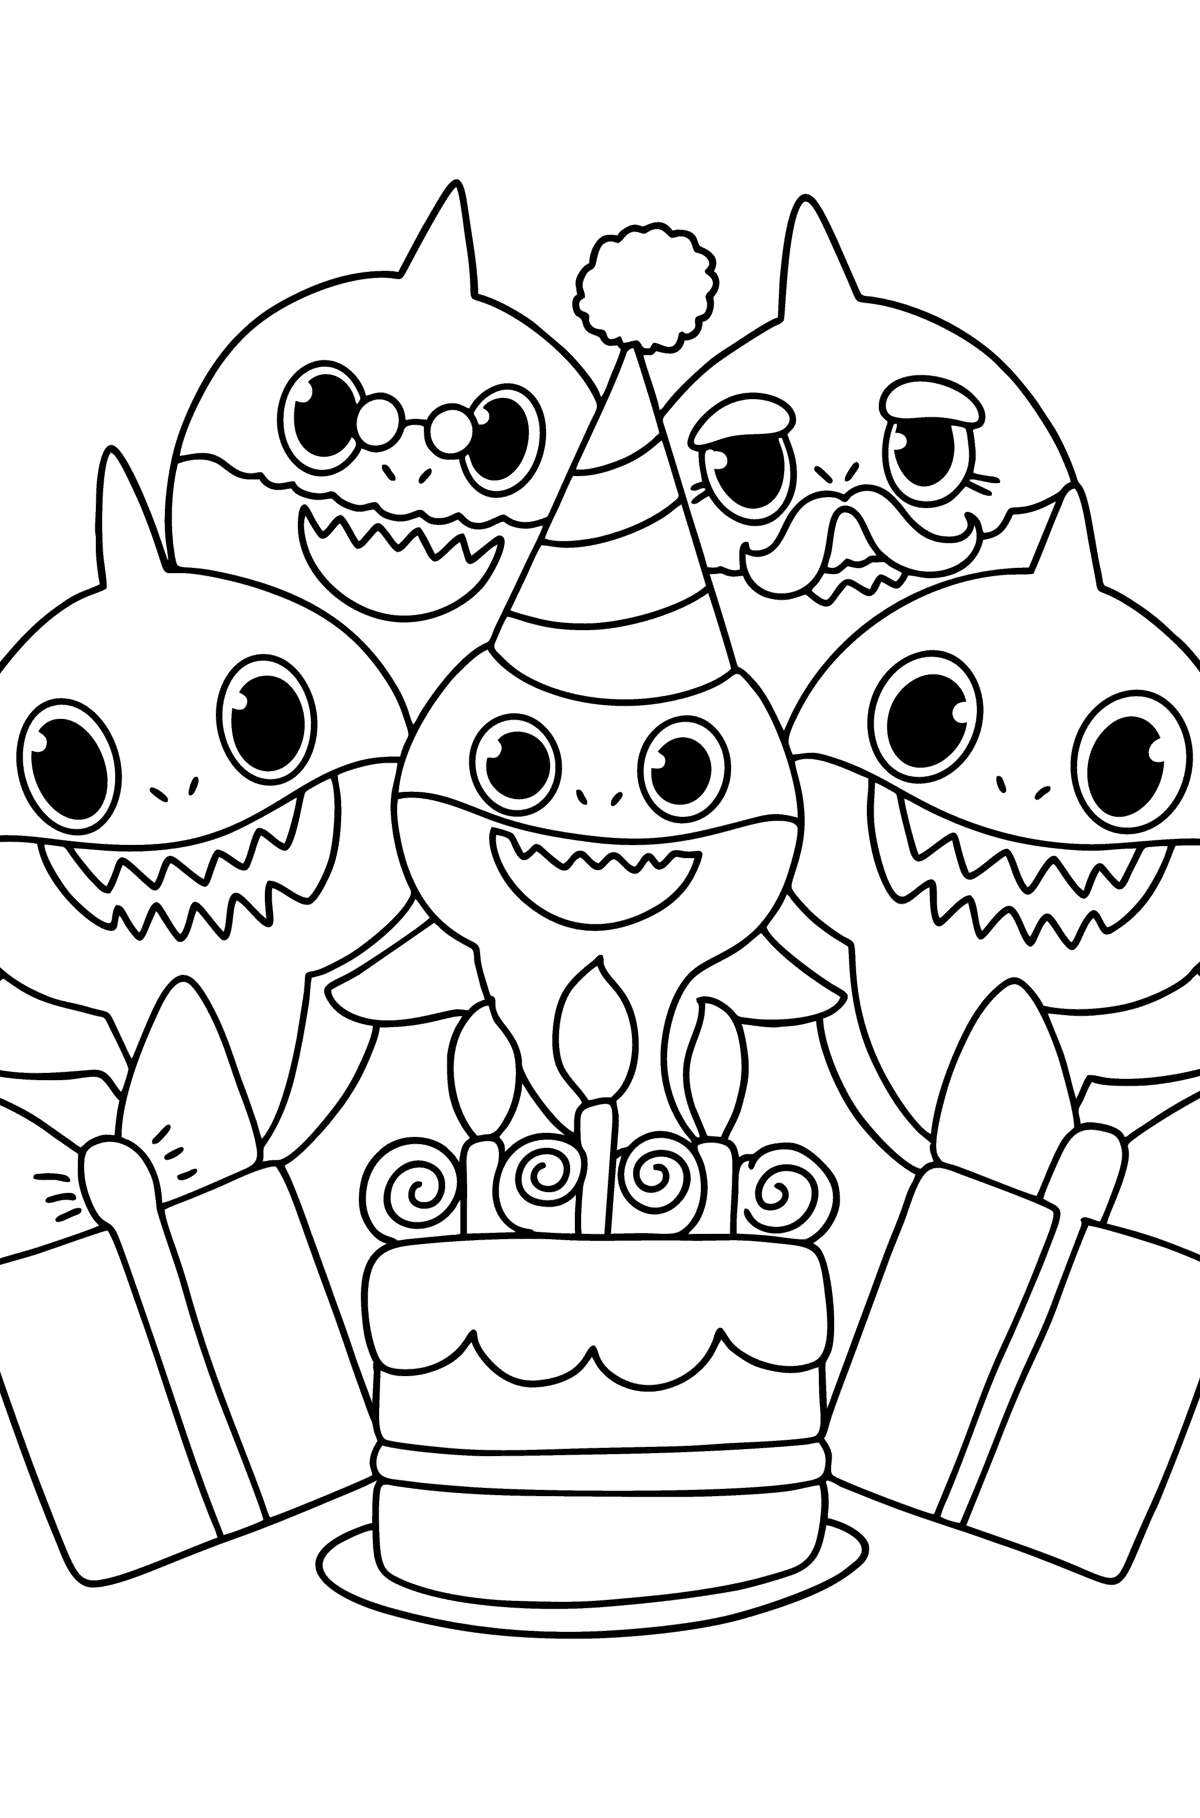 Baby shark Birthday coloring page - Coloring Pages for Kids